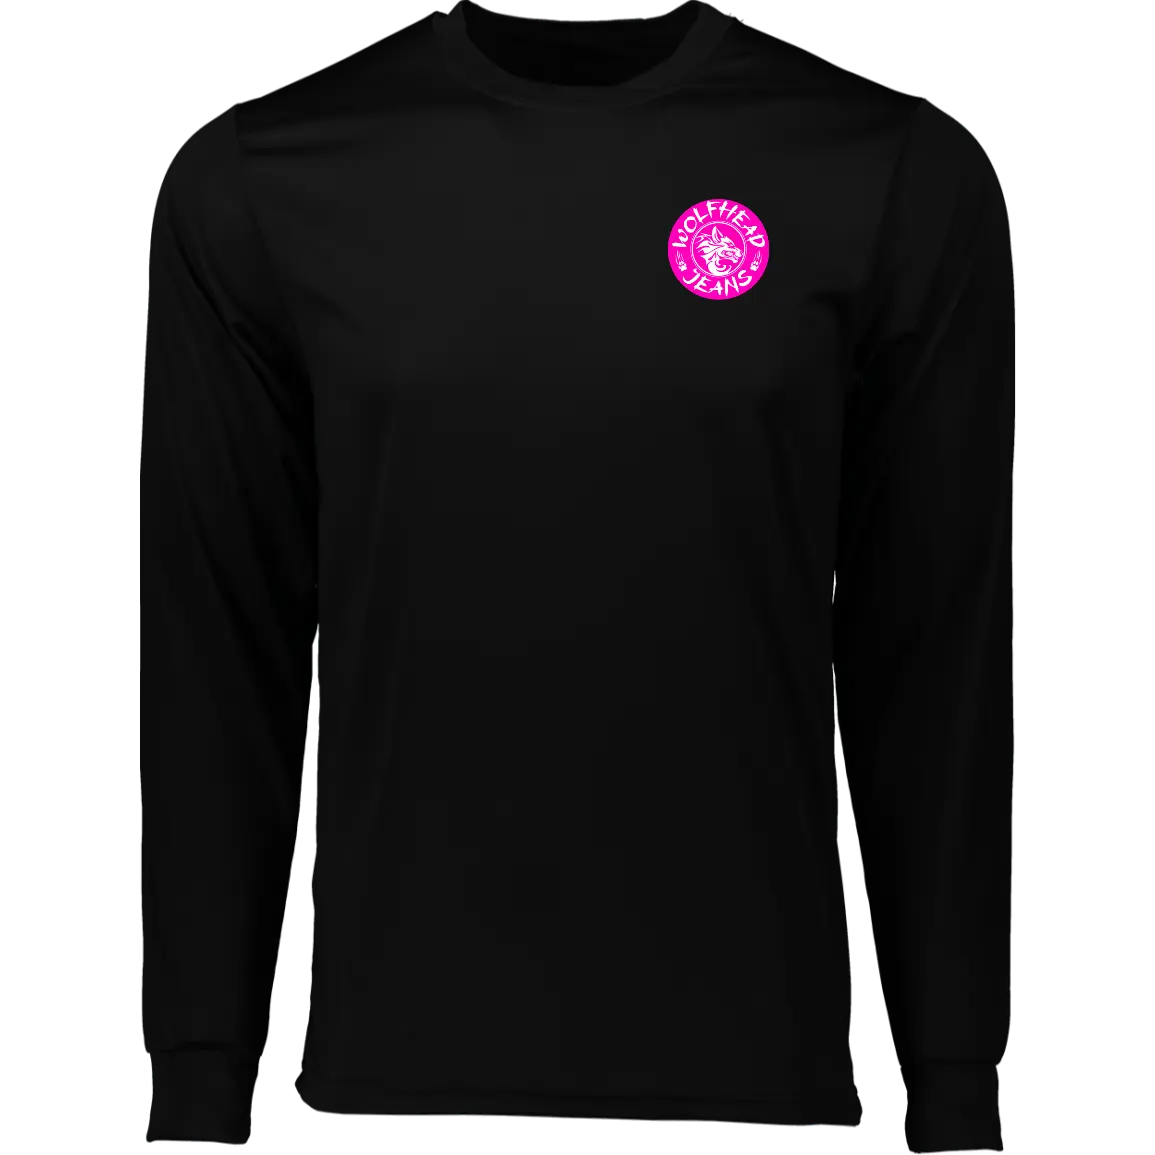 Be the Alpha Pink Long Sleeve Moisture-Wicking Tee - Image #3